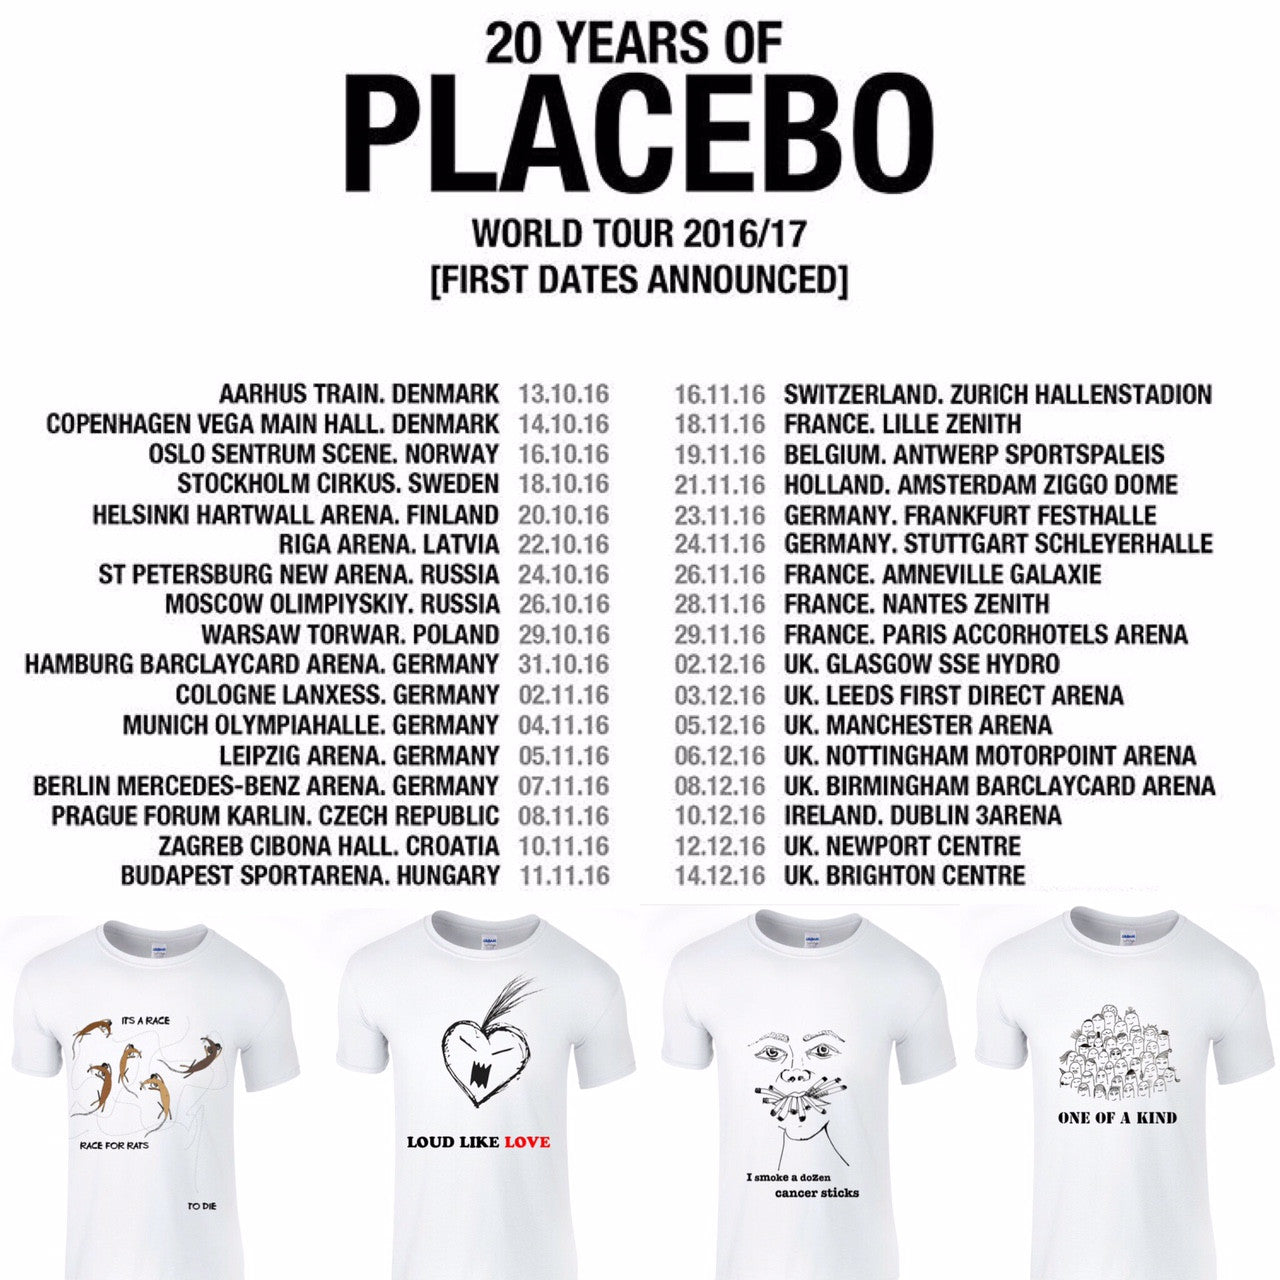 Placebo is coming to Brighton!